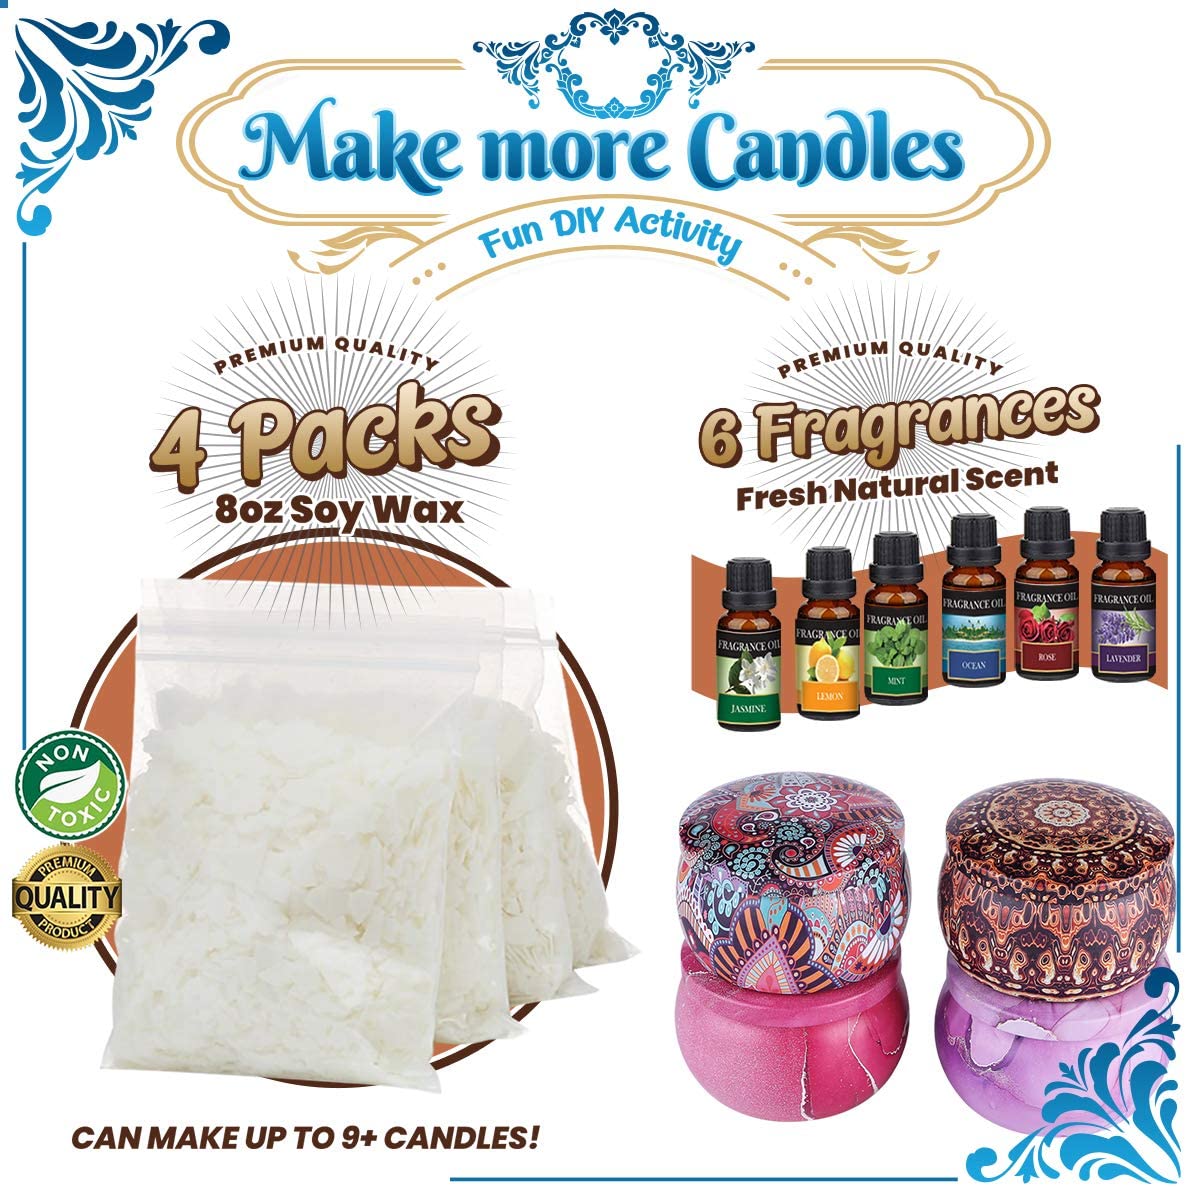 Family Craft Night with Toshwerks: DIY Granulated Wax Candles